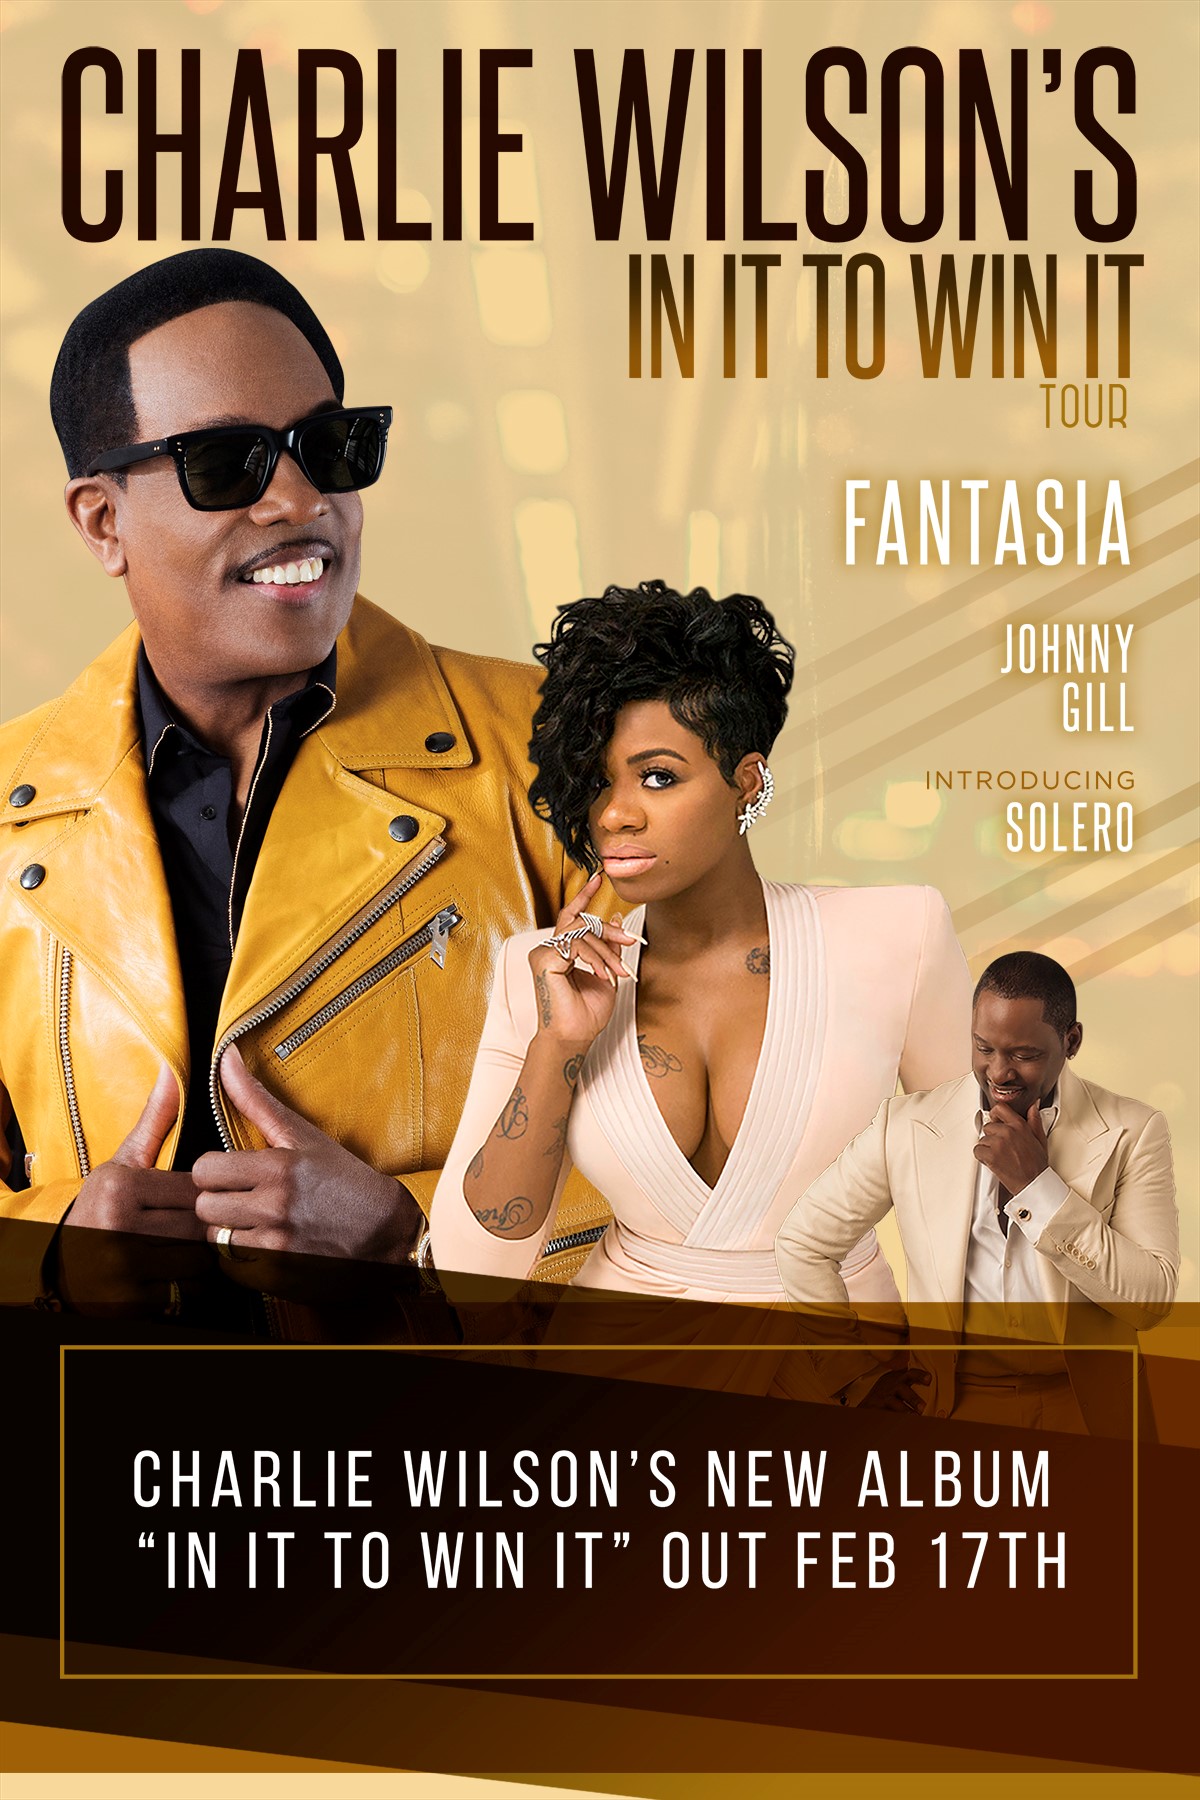 Charlie Wilson In It to Win It Tour